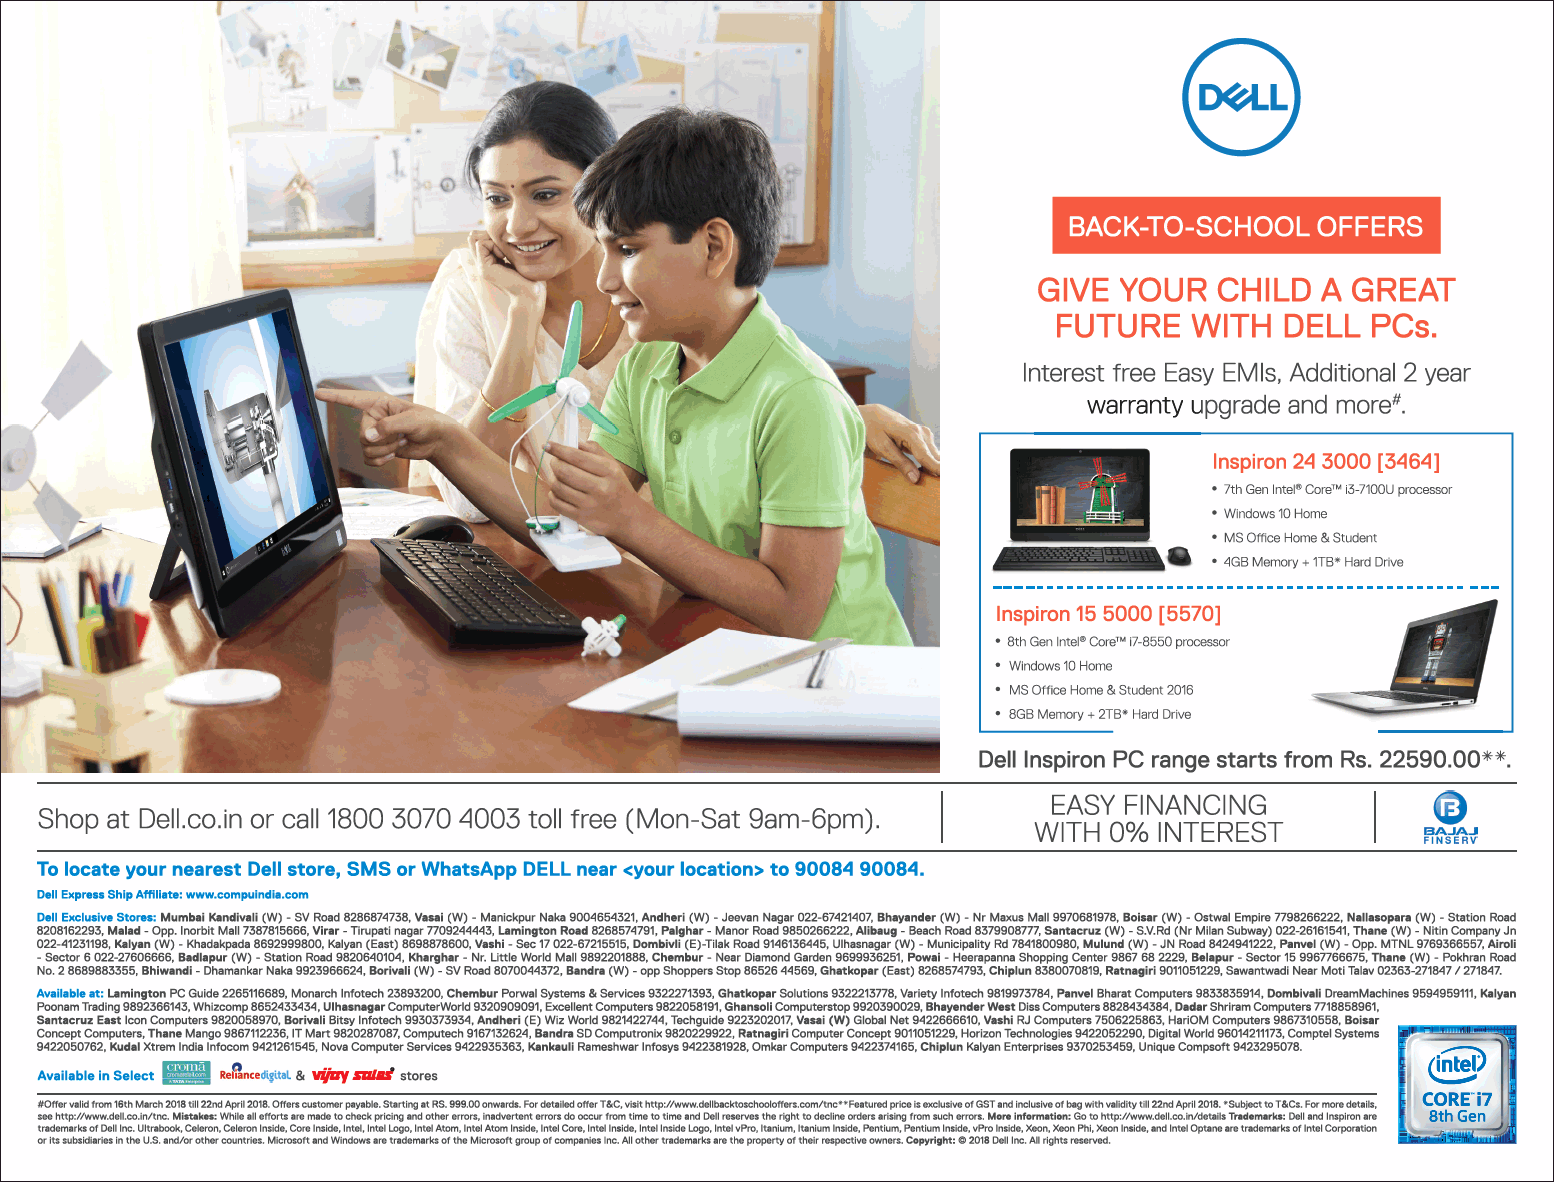 Dell Laptops Back To School Offers Give Your Child A Great Future Will Dell  Pcs Ad - Advert Gallery